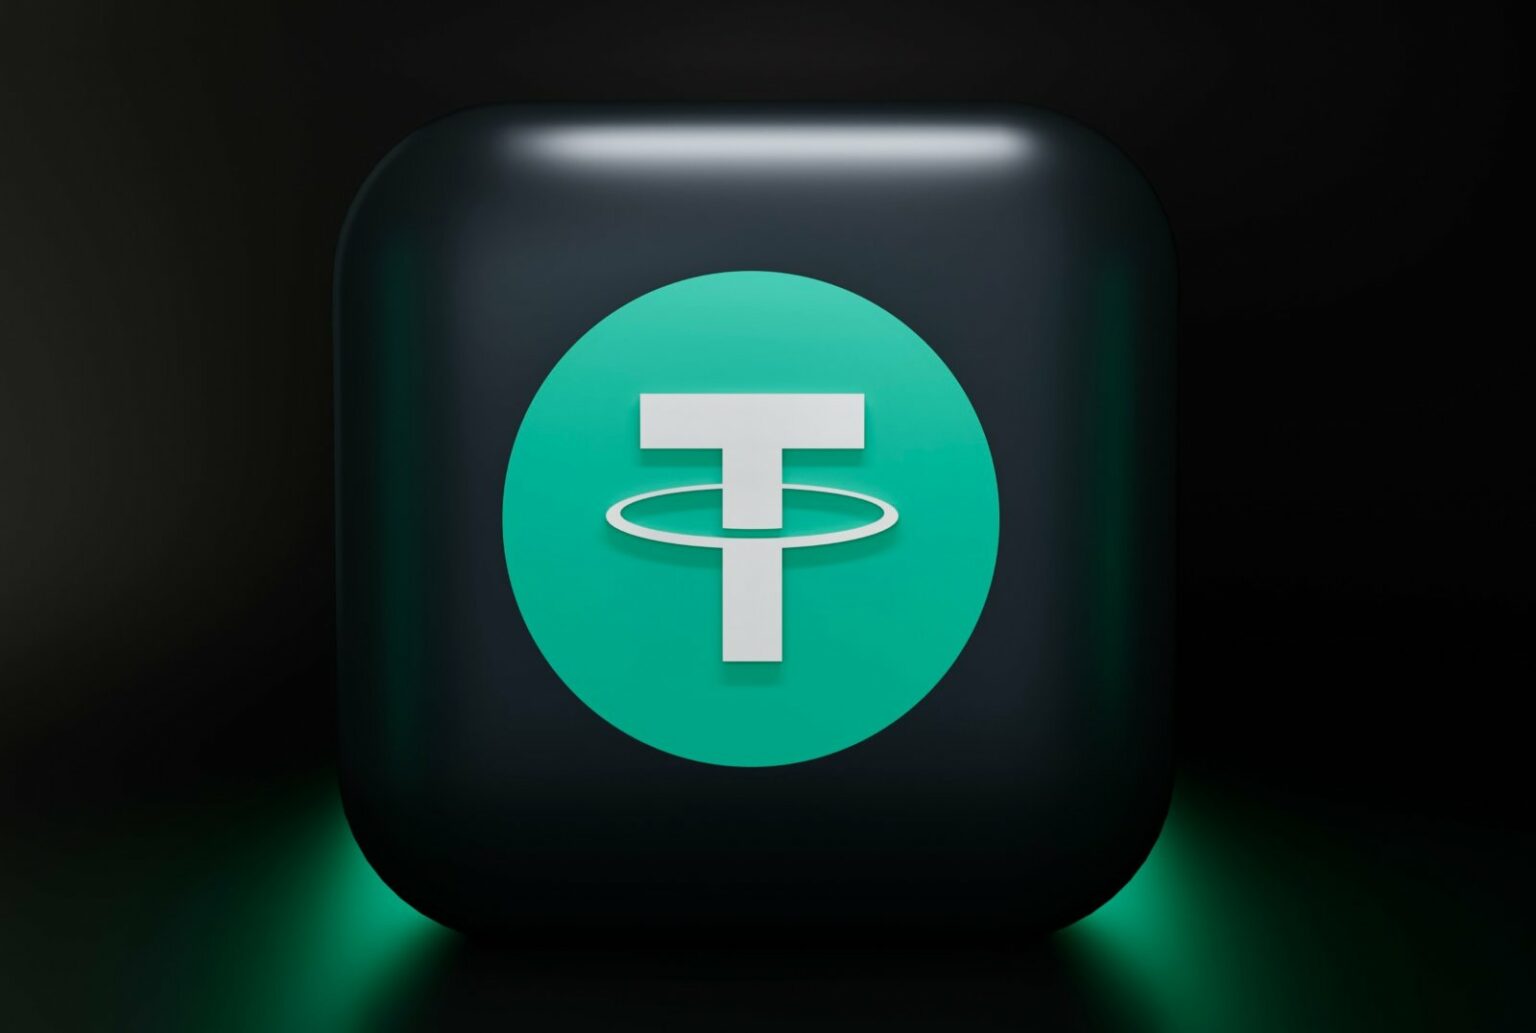 The mission of Tether around the world